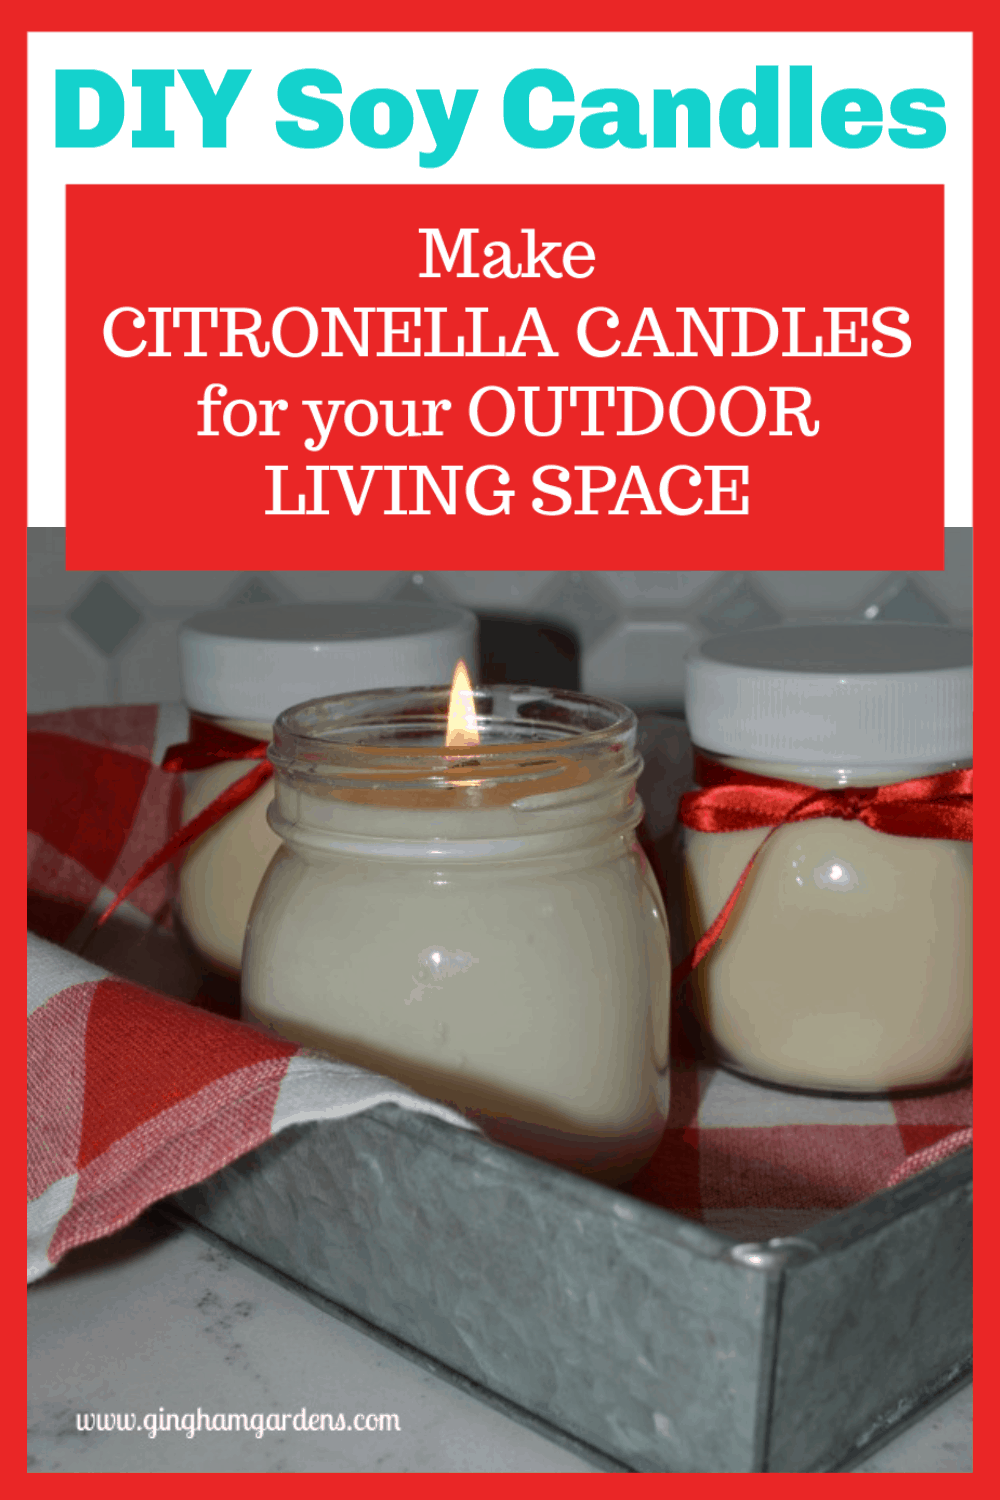 Image of Candles with text overlay - DIY Soy Candles